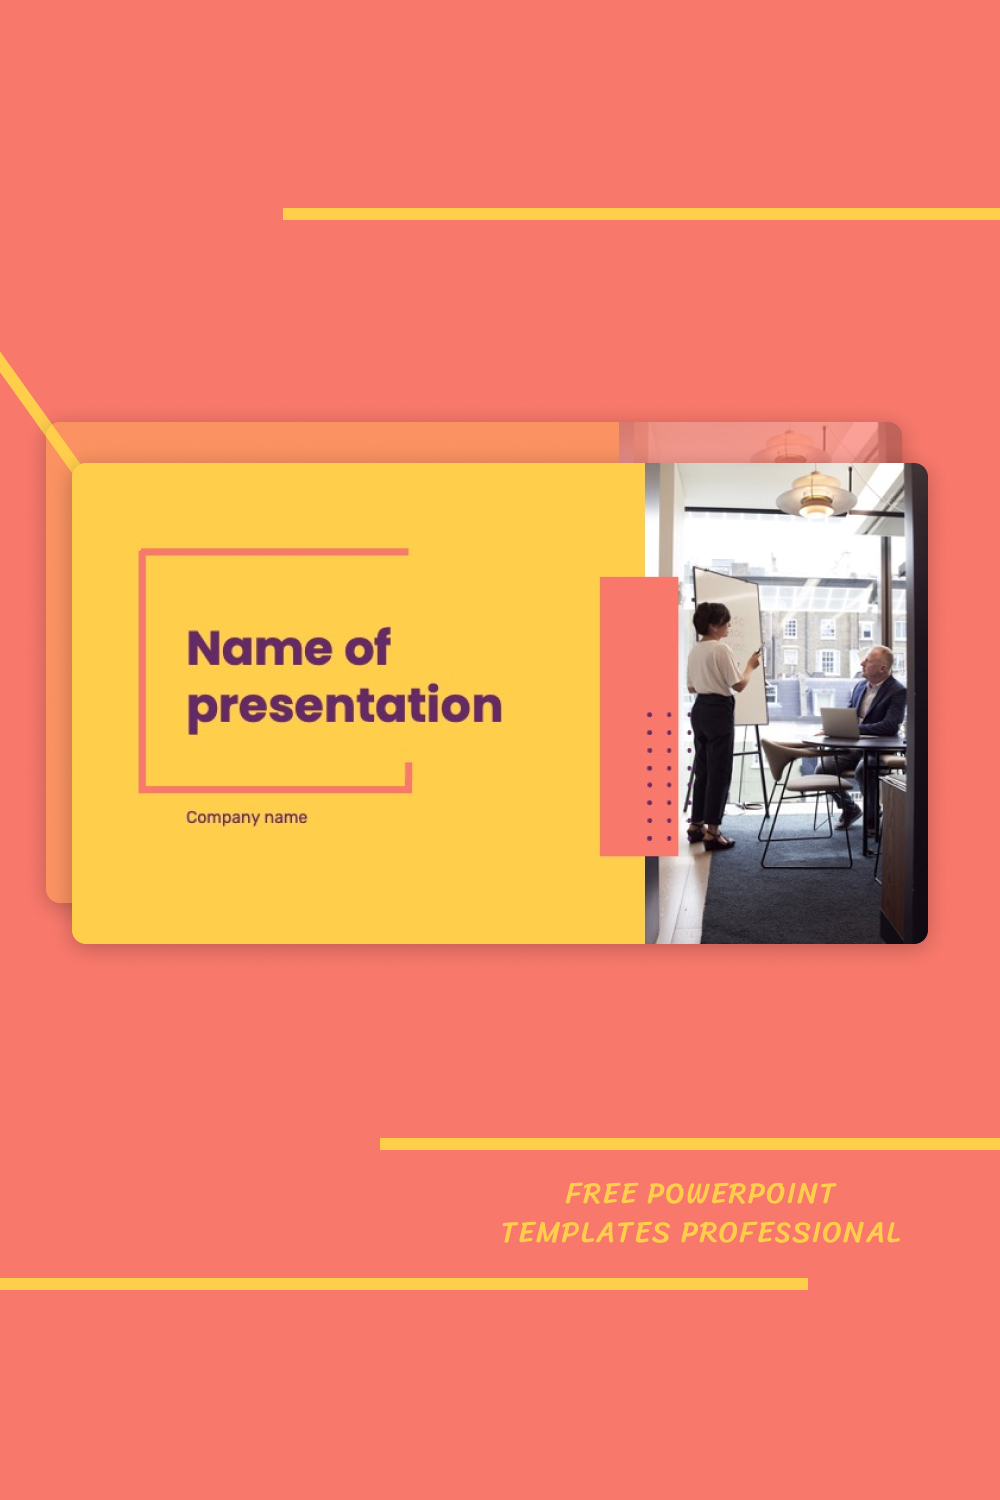 Powerpoint templates professional of pinterest.